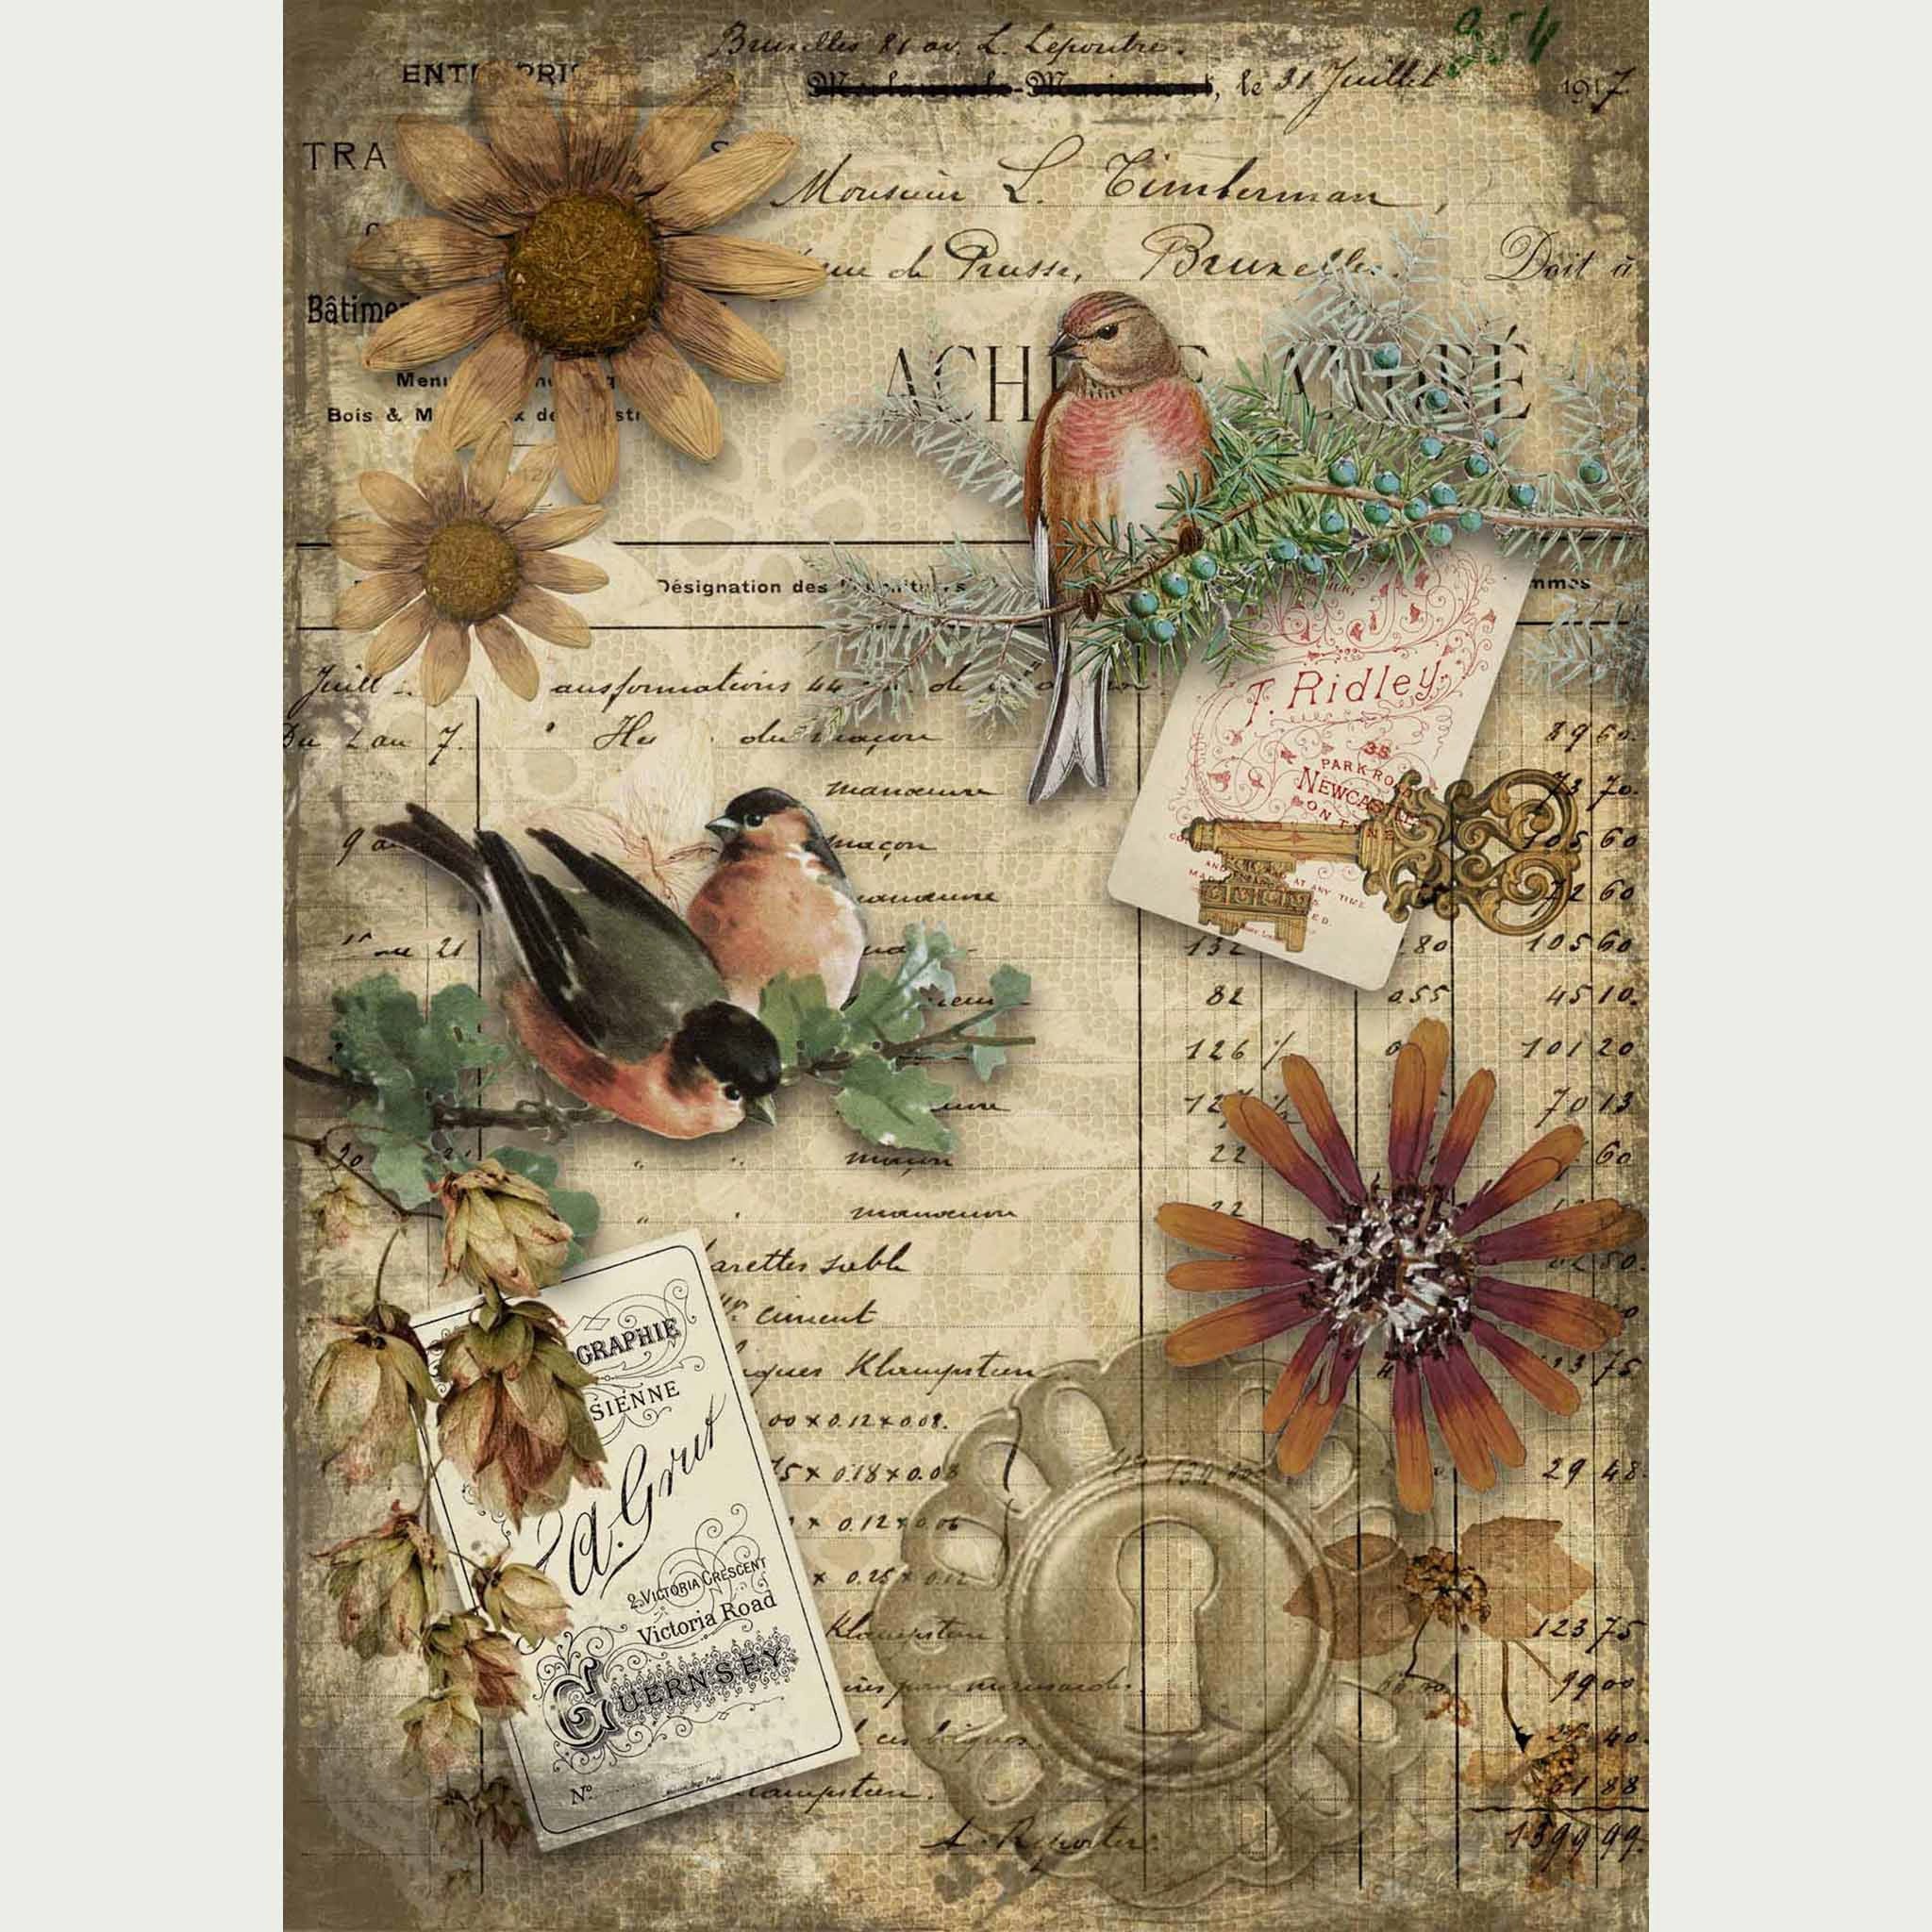 A1 rice paper design that features flowers, a key and keyhole, and birds perched on leafy branches against a backdrop of a vintage receipt. White borders on the sides.